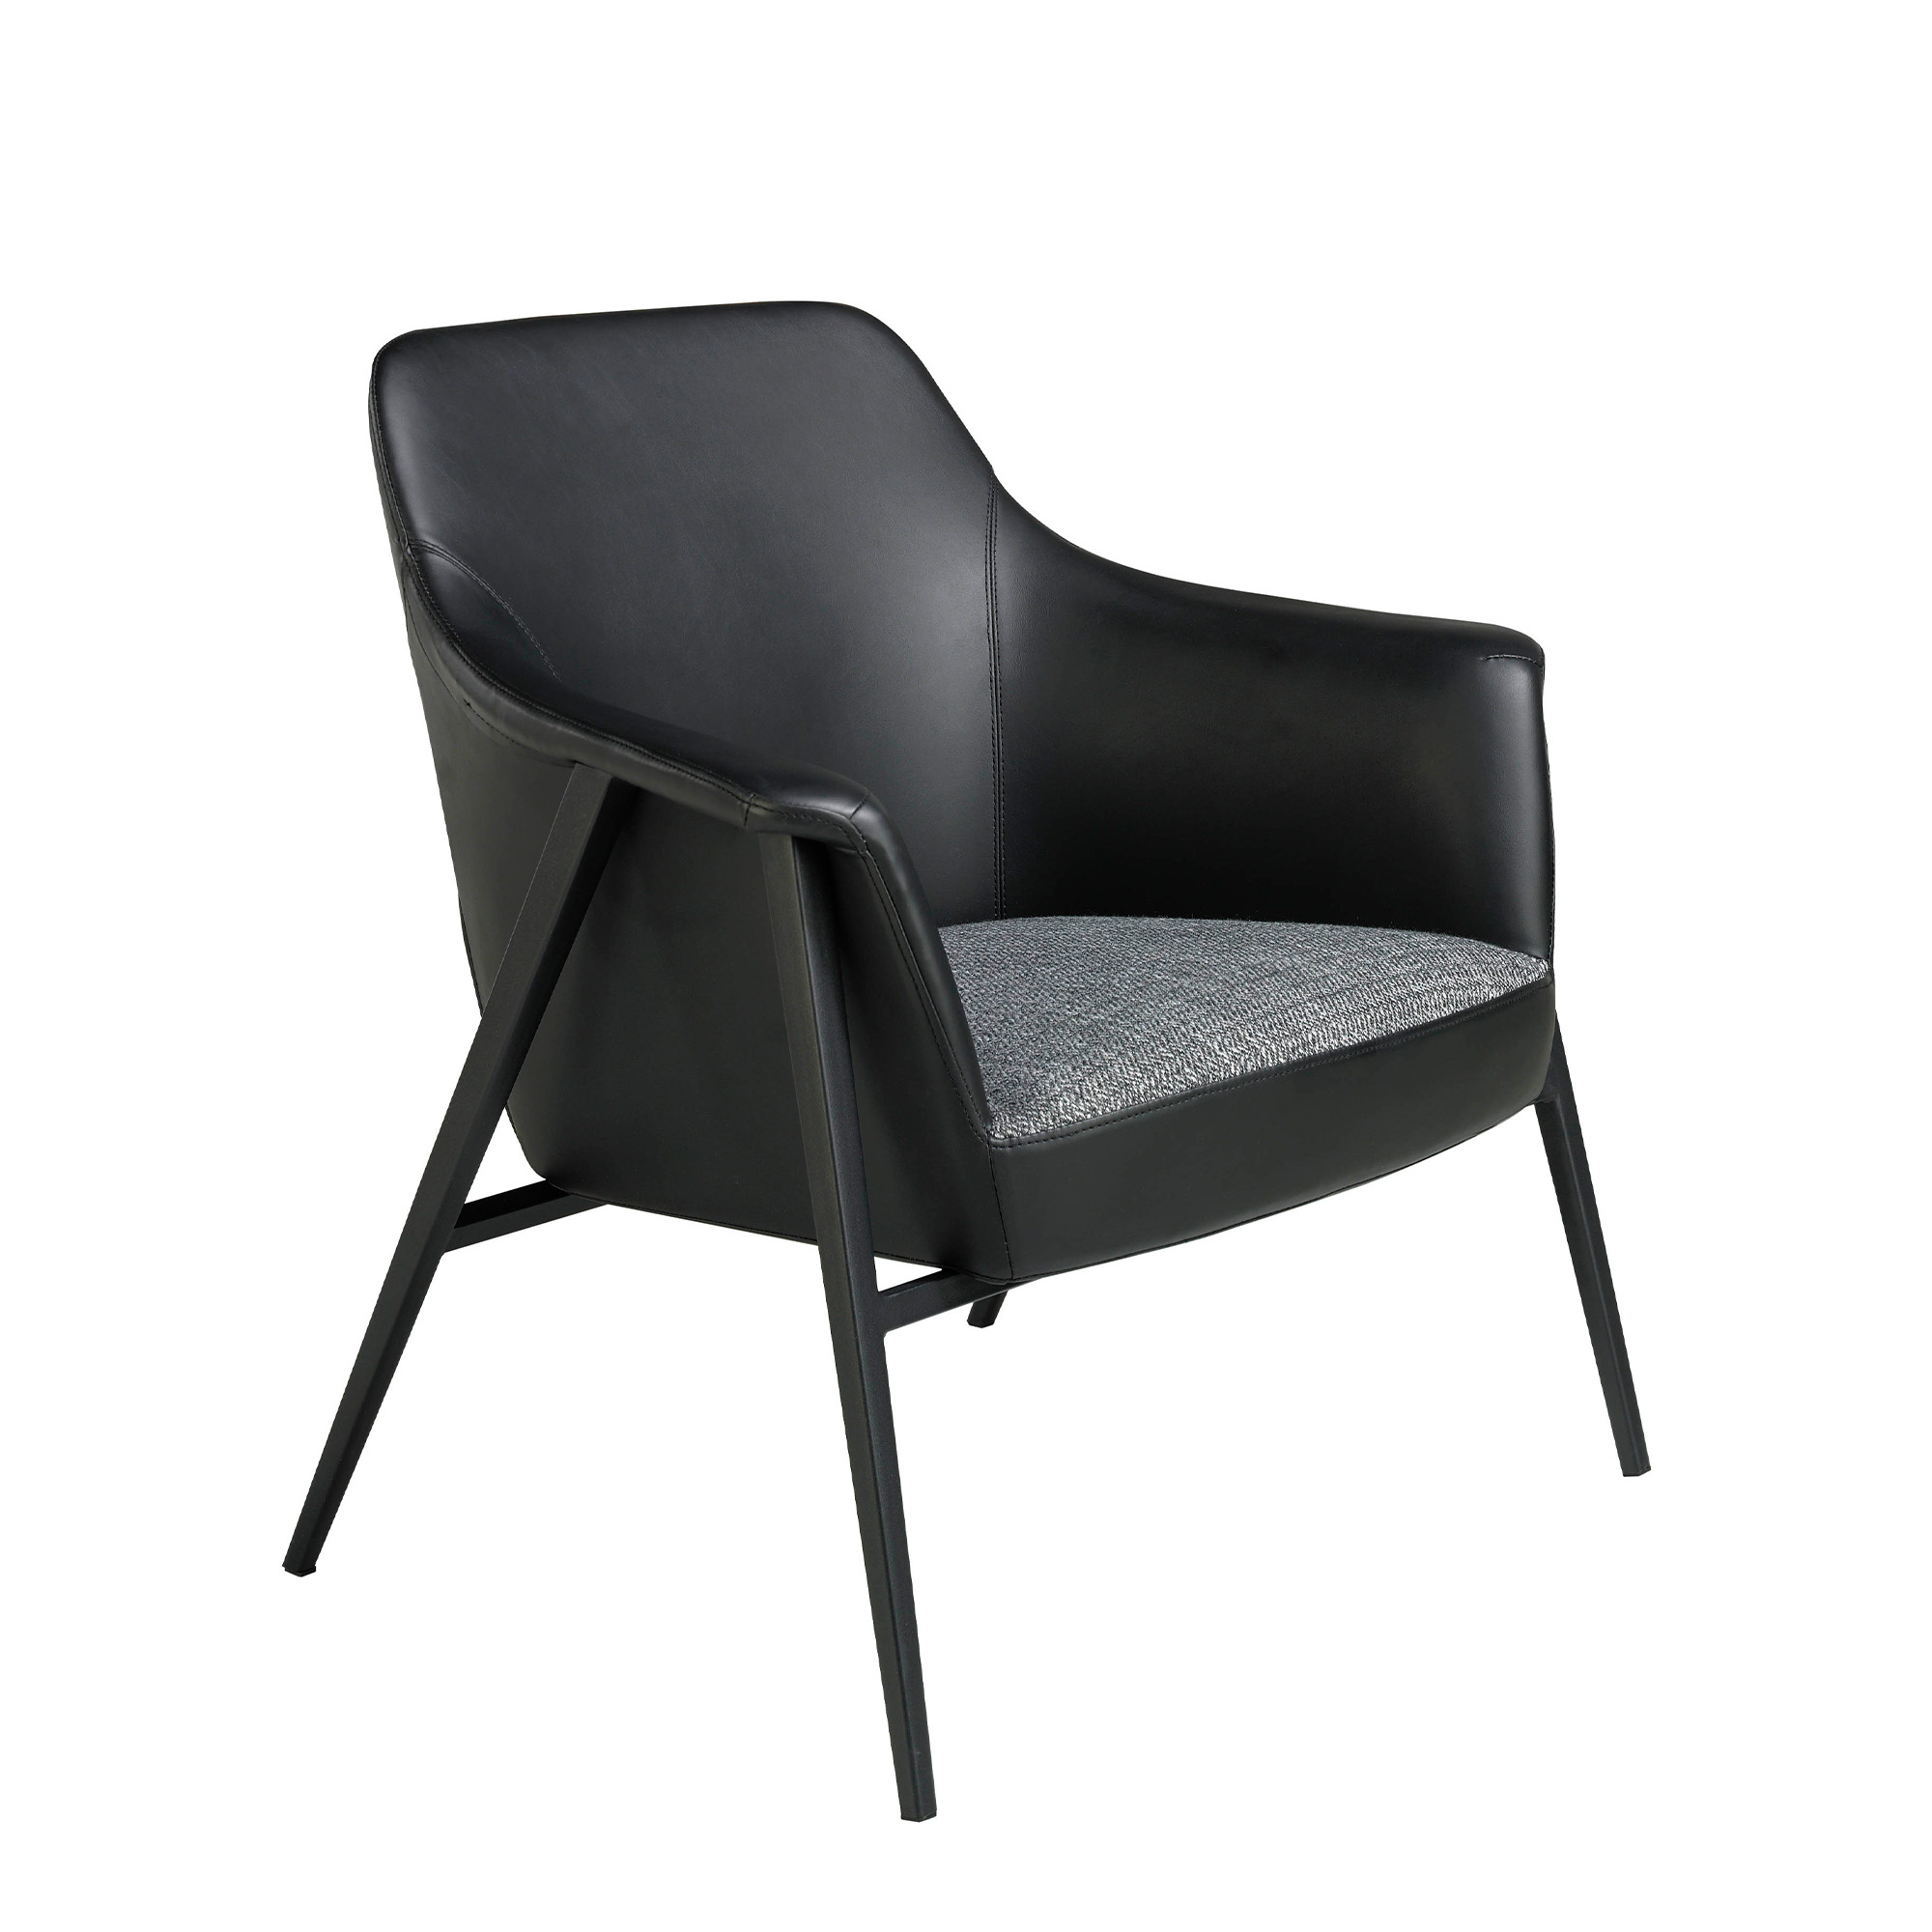 Upholstered fabric and eco-leather armchair with black steel structure